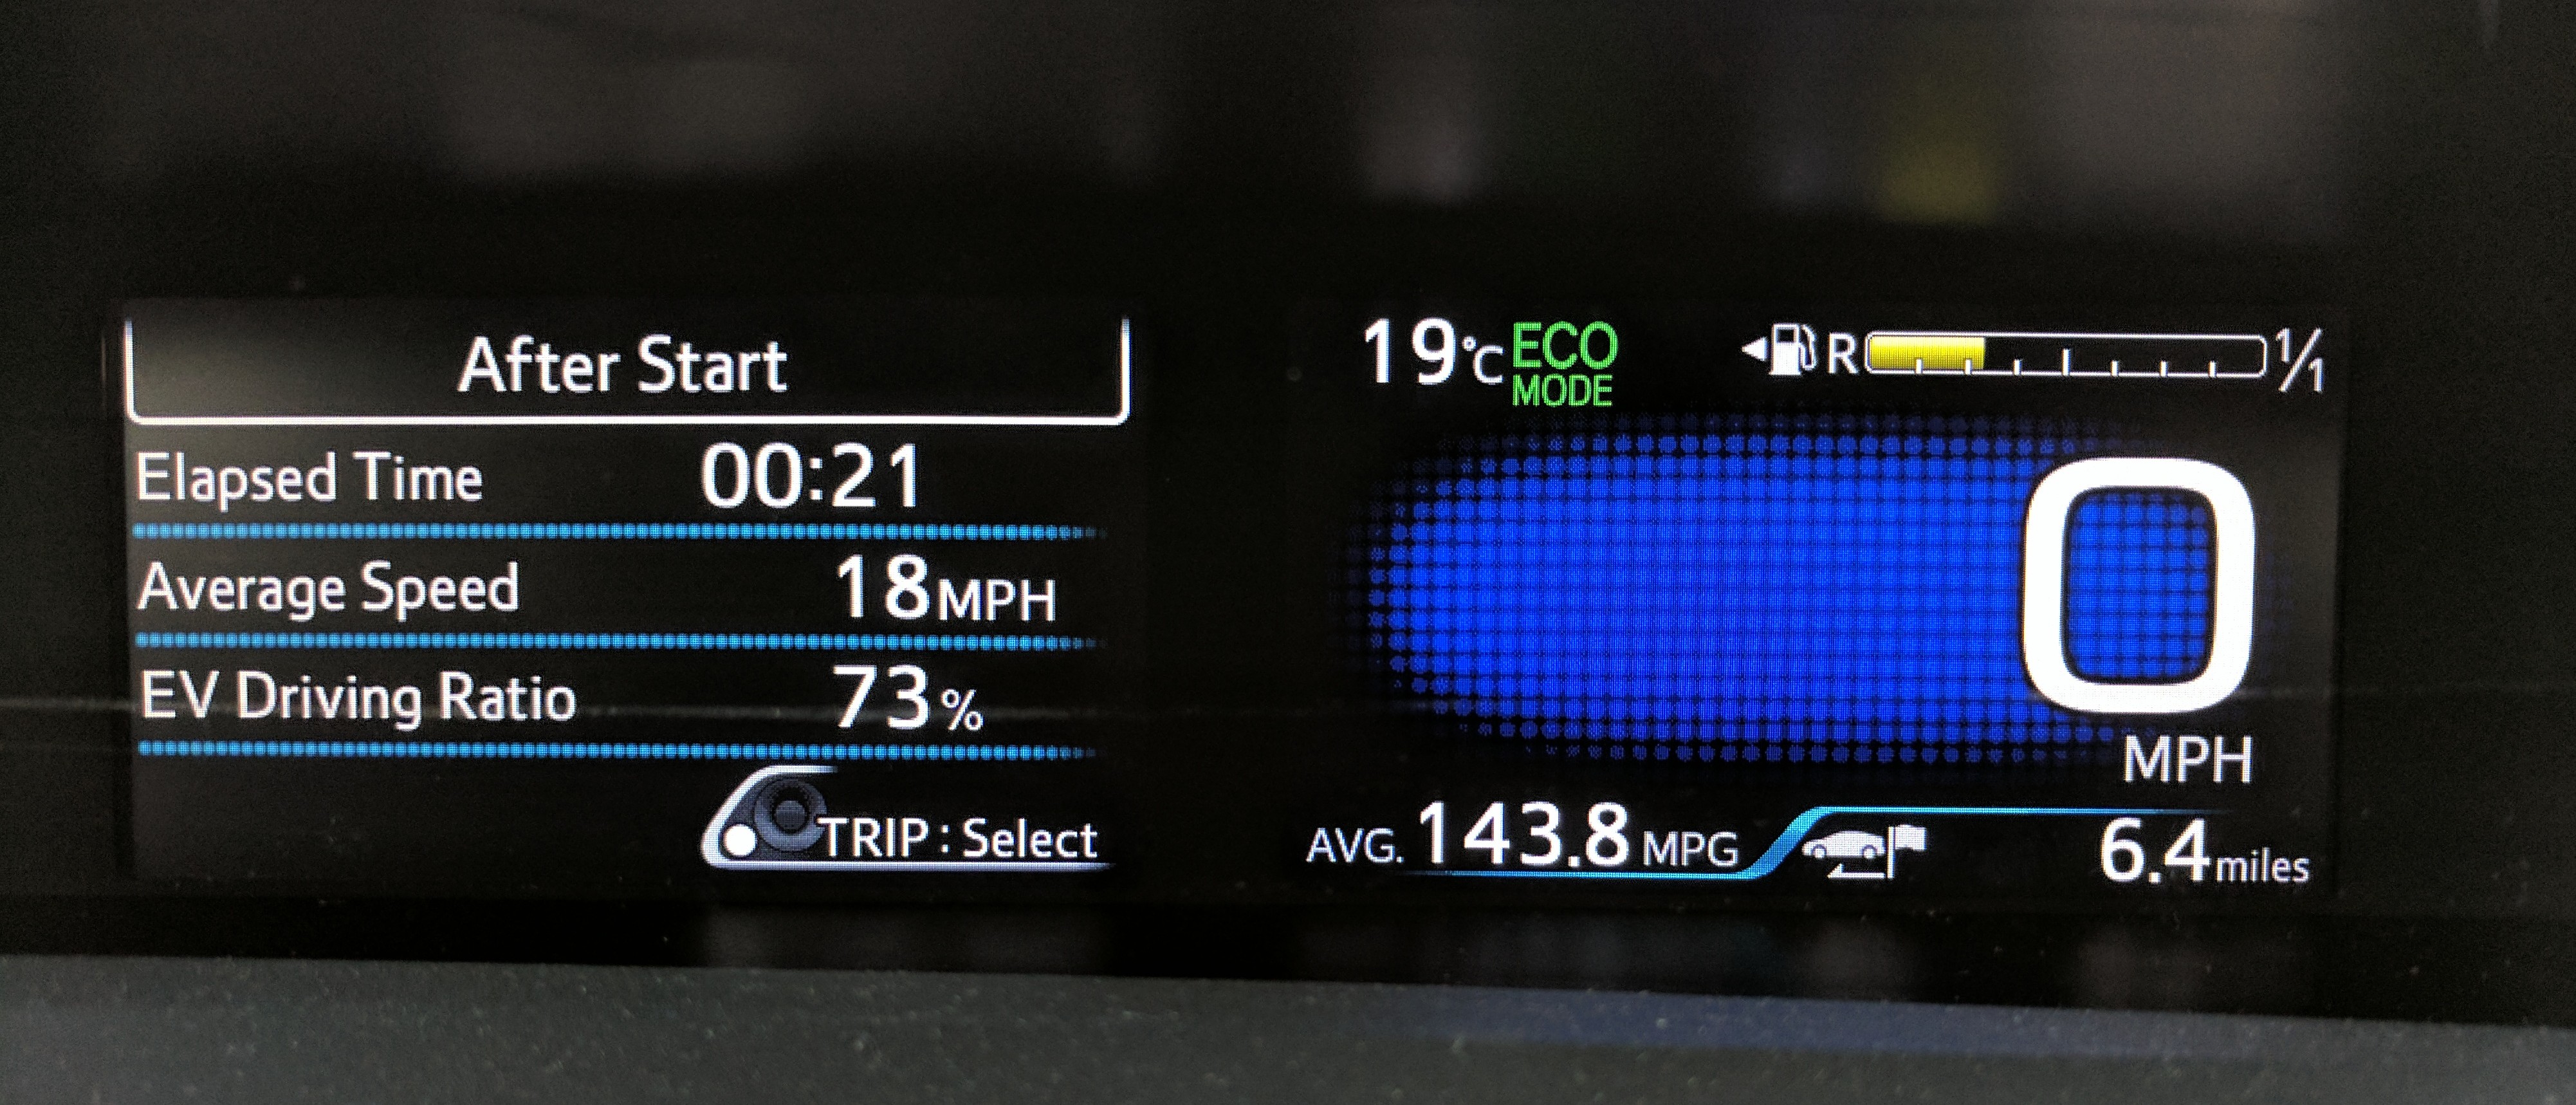 2016 Prius MPG from cold start - Page 4 - EV and Alternative Fuels - PistonHeads